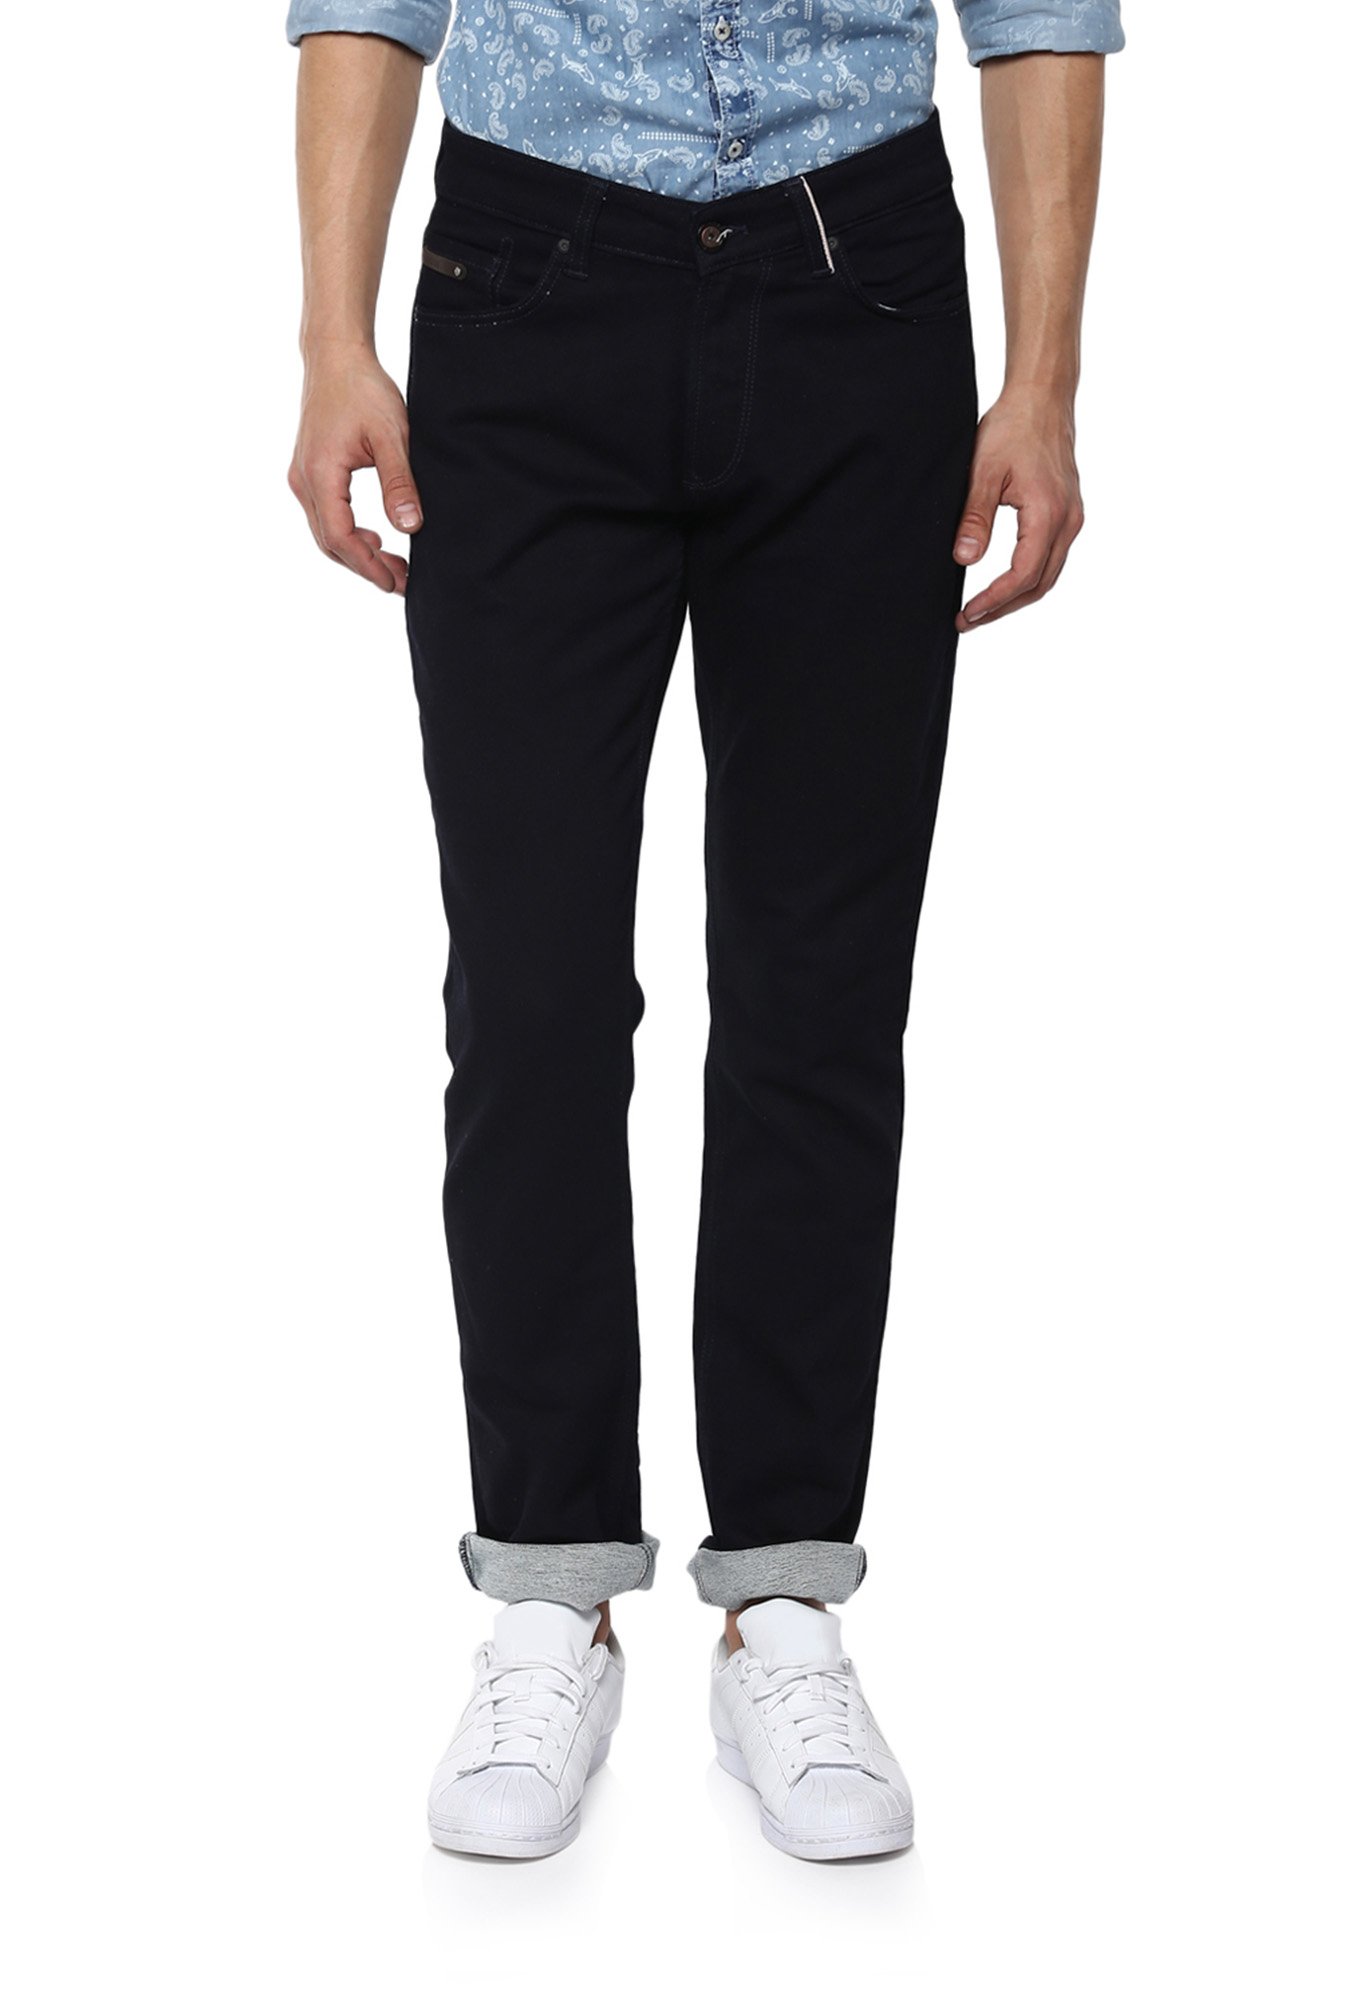 Spykar Black Tapered Fit Solid Jeans 